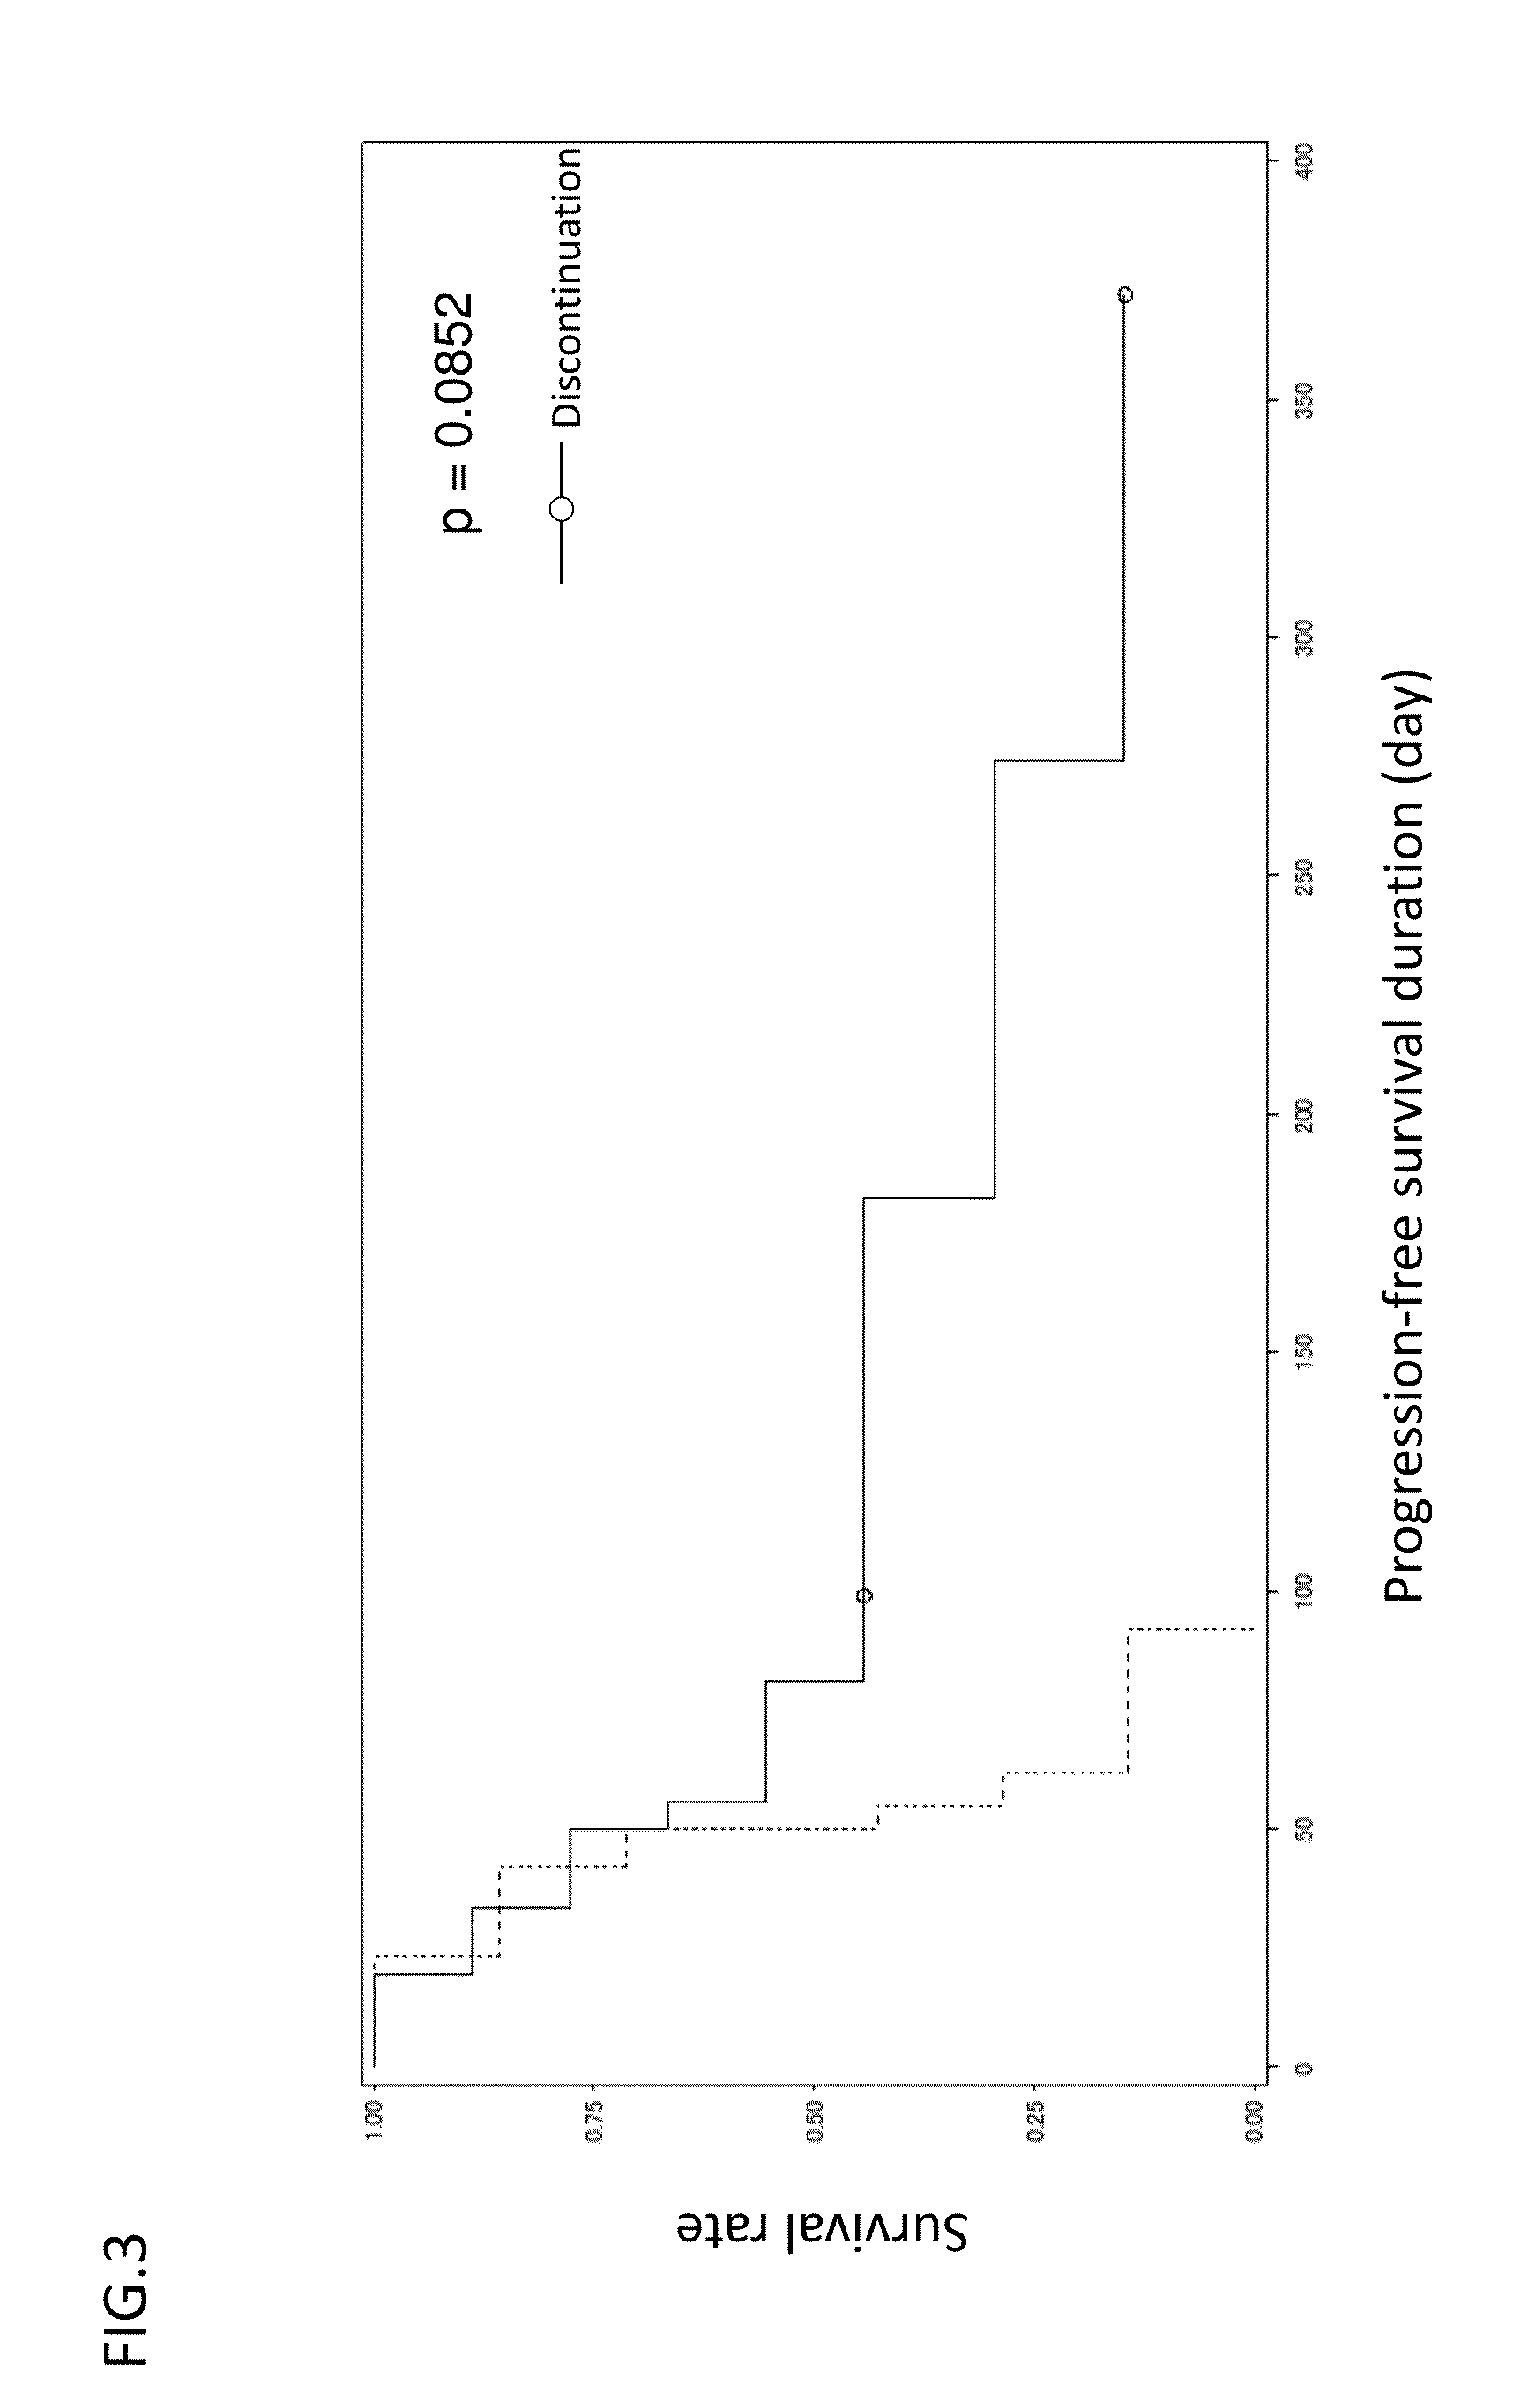 Gpc3-targeting drug which is administered to patient responsive to gpc3-targeting drug therapy